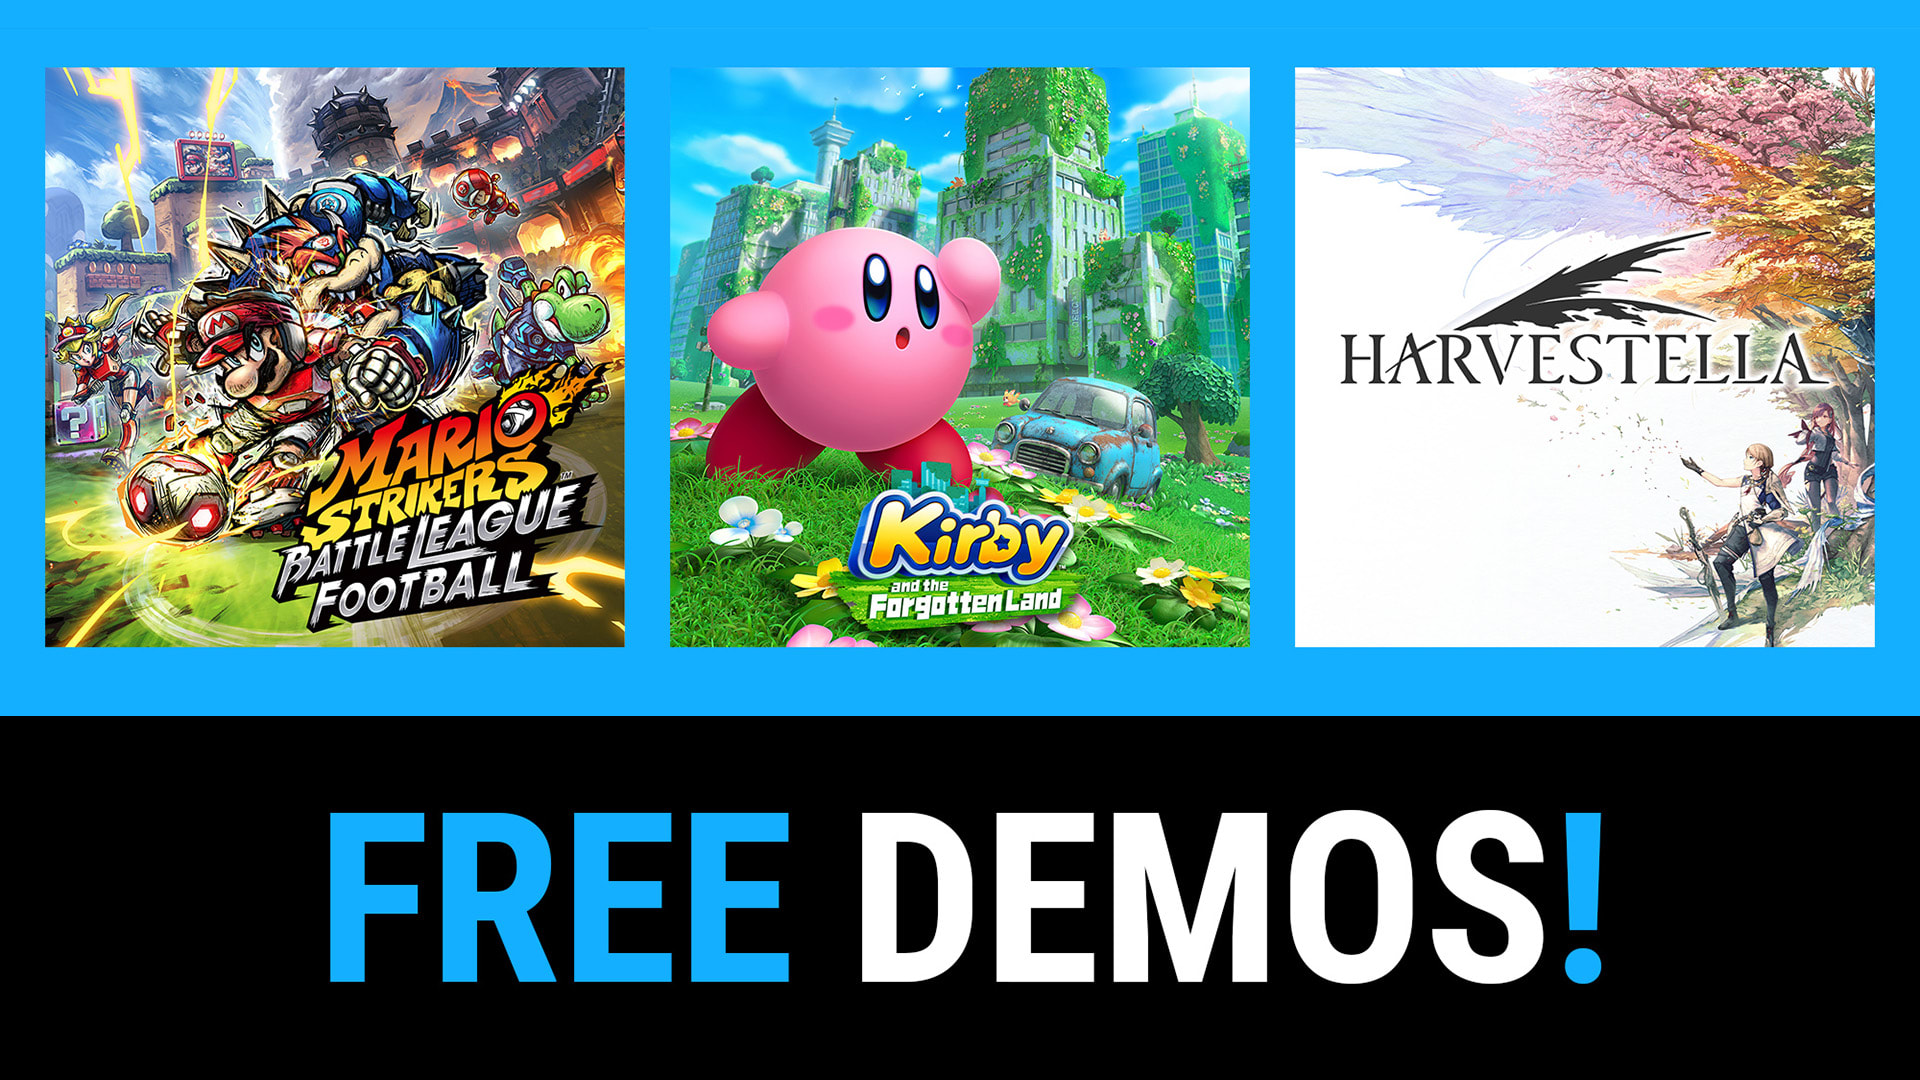 Nintendo Switch: list of free games, Game Trials, demos, apps, etc